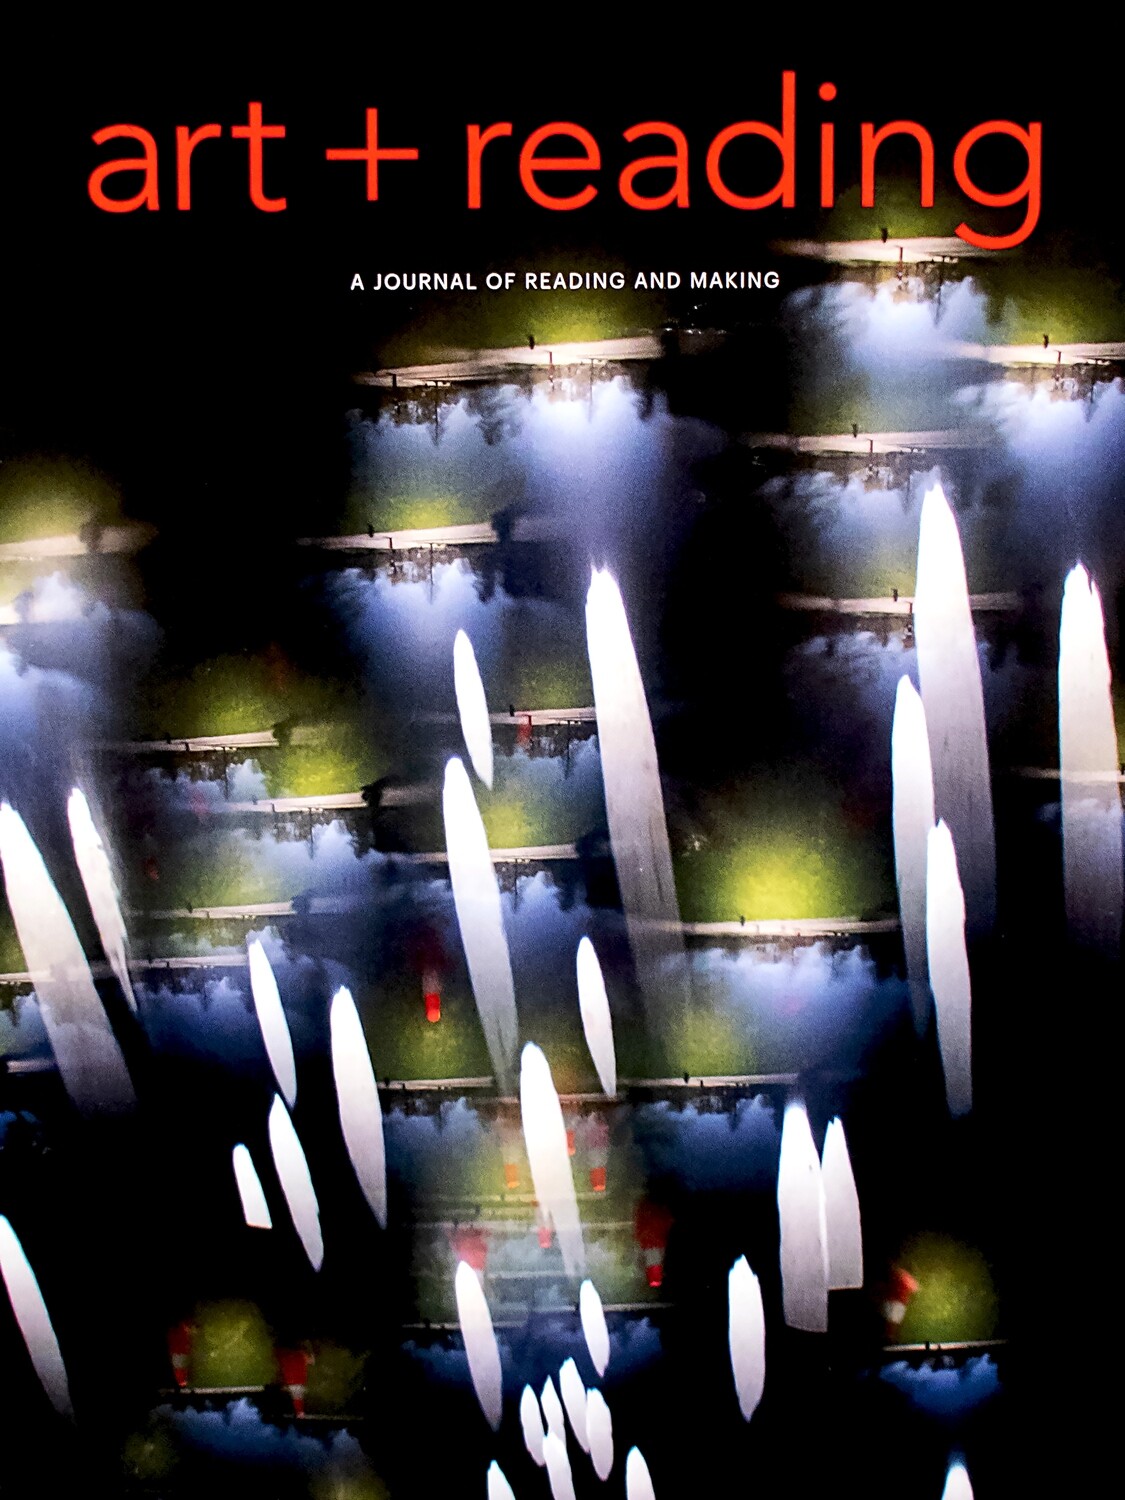 Art + Reading: A Journal of Reading and Making